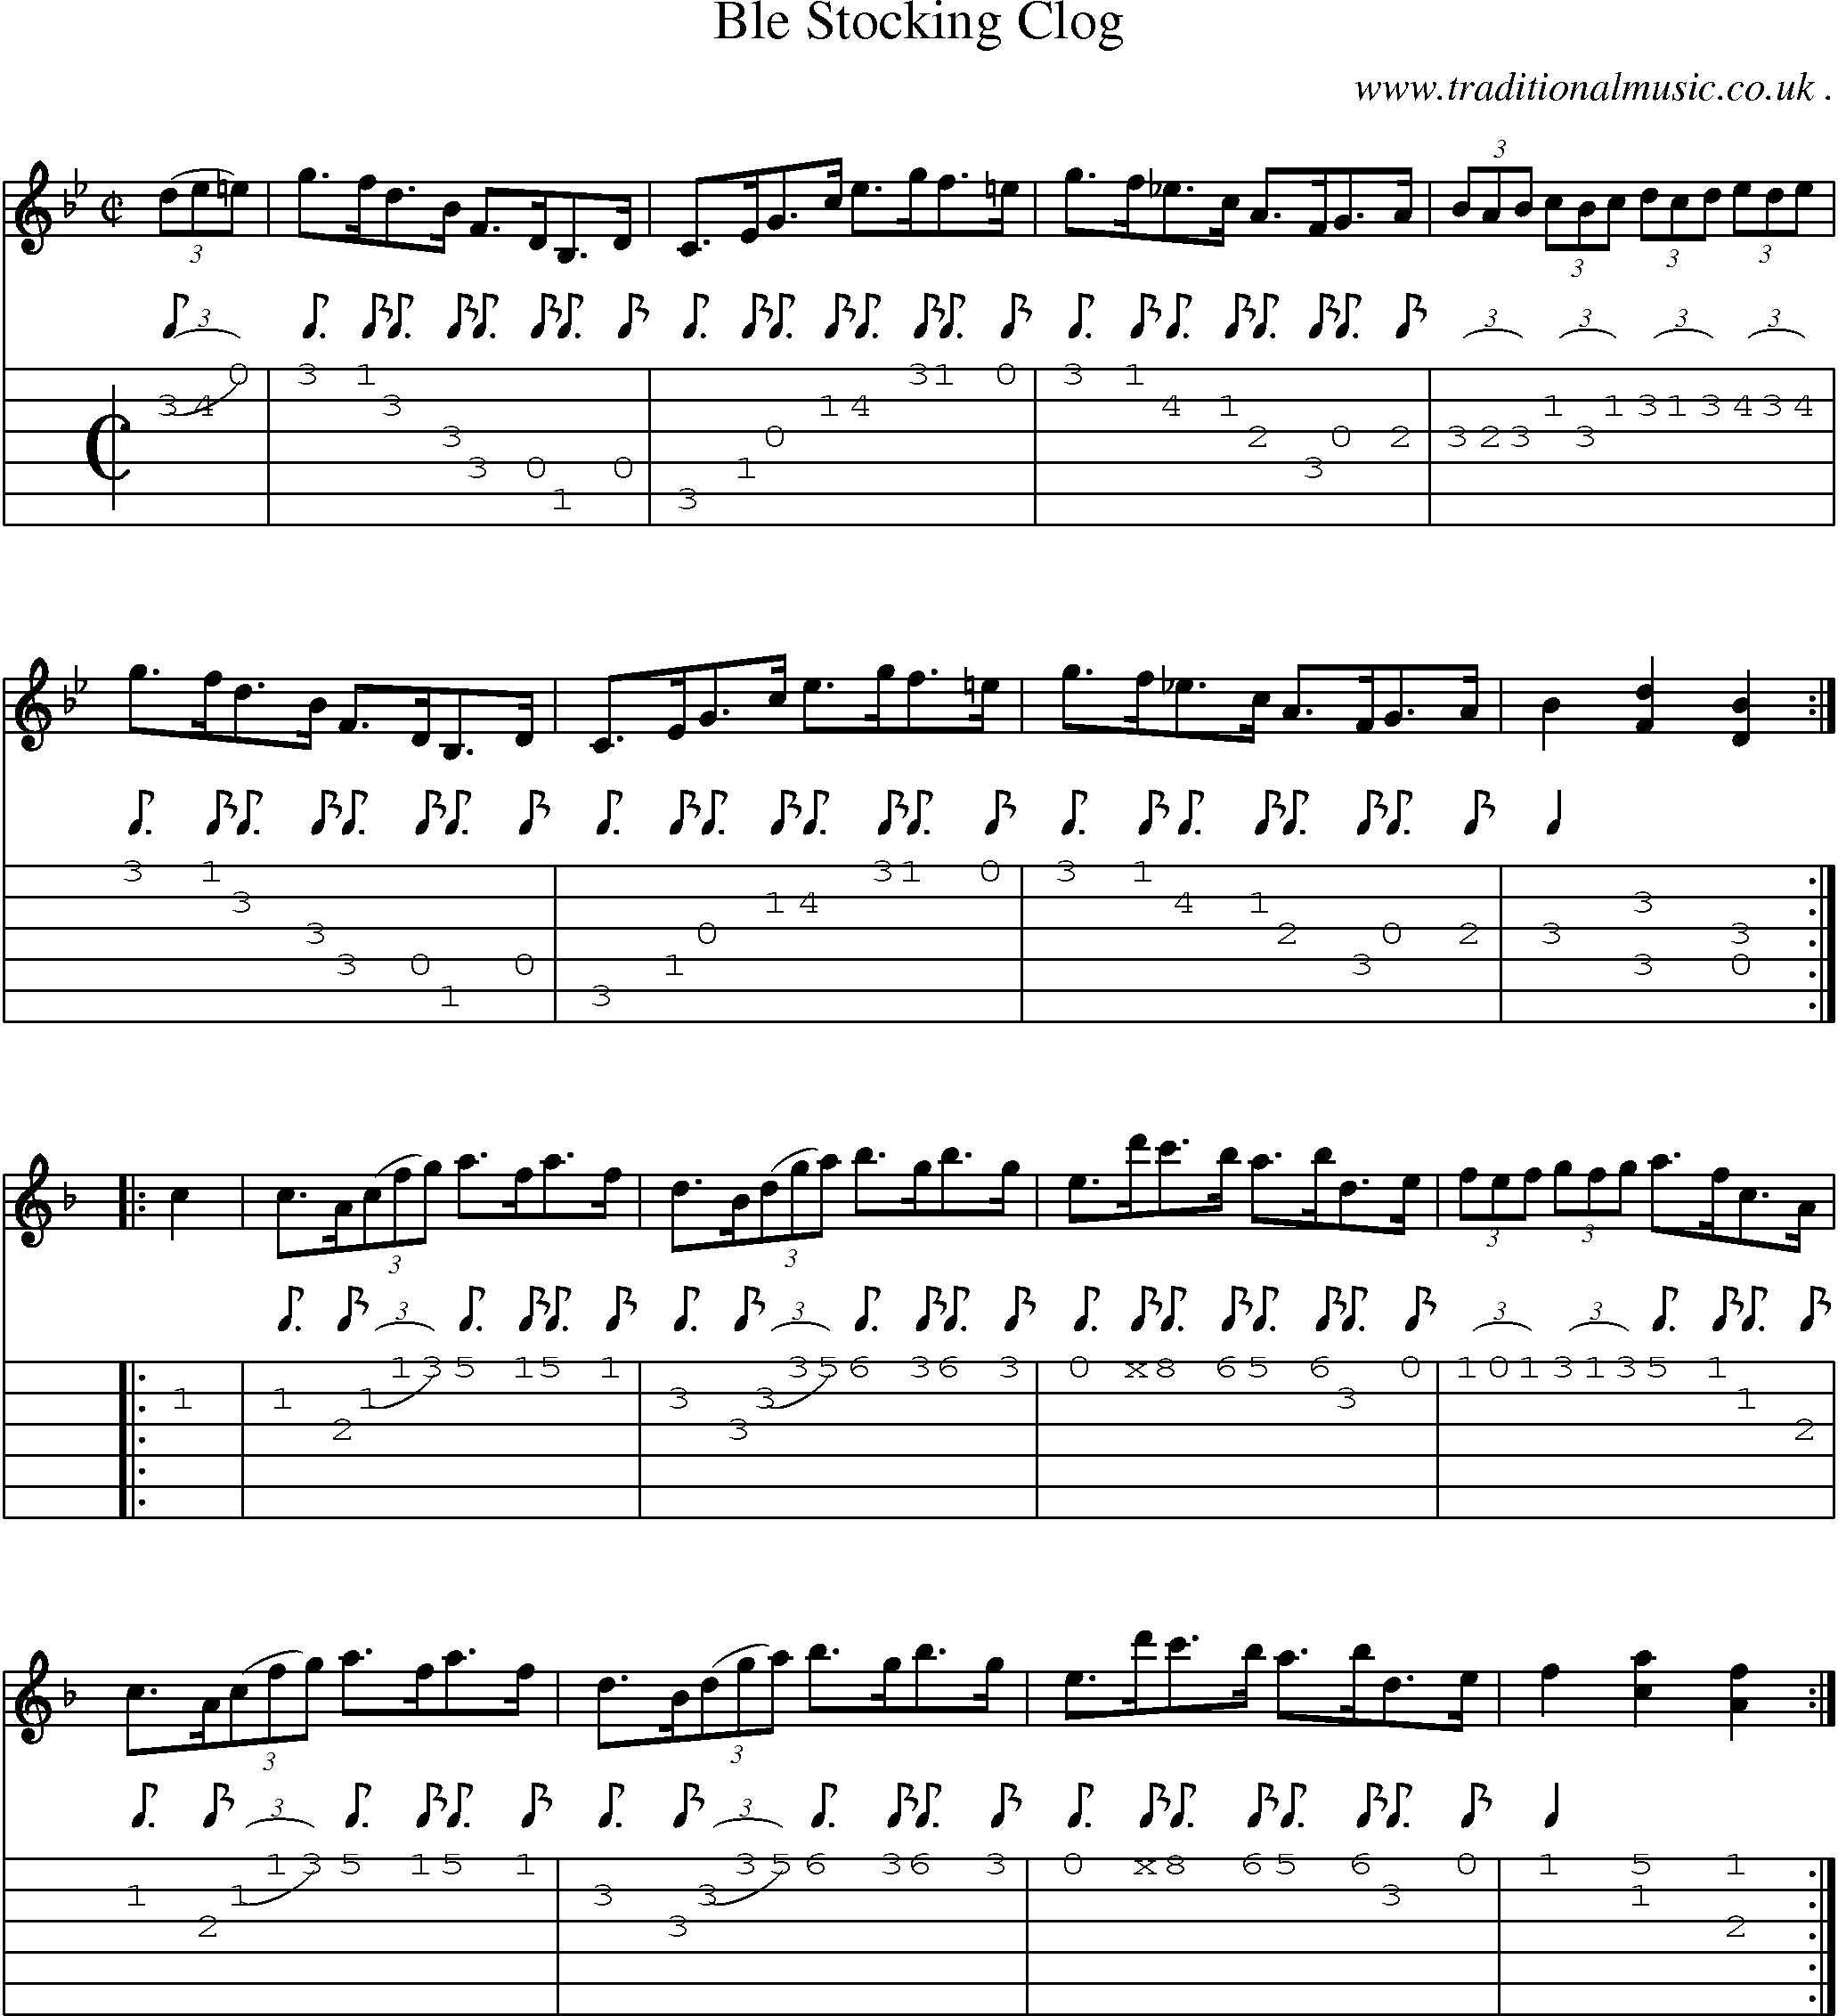 Sheet-Music and Guitar Tabs for Ble Stocking Clog